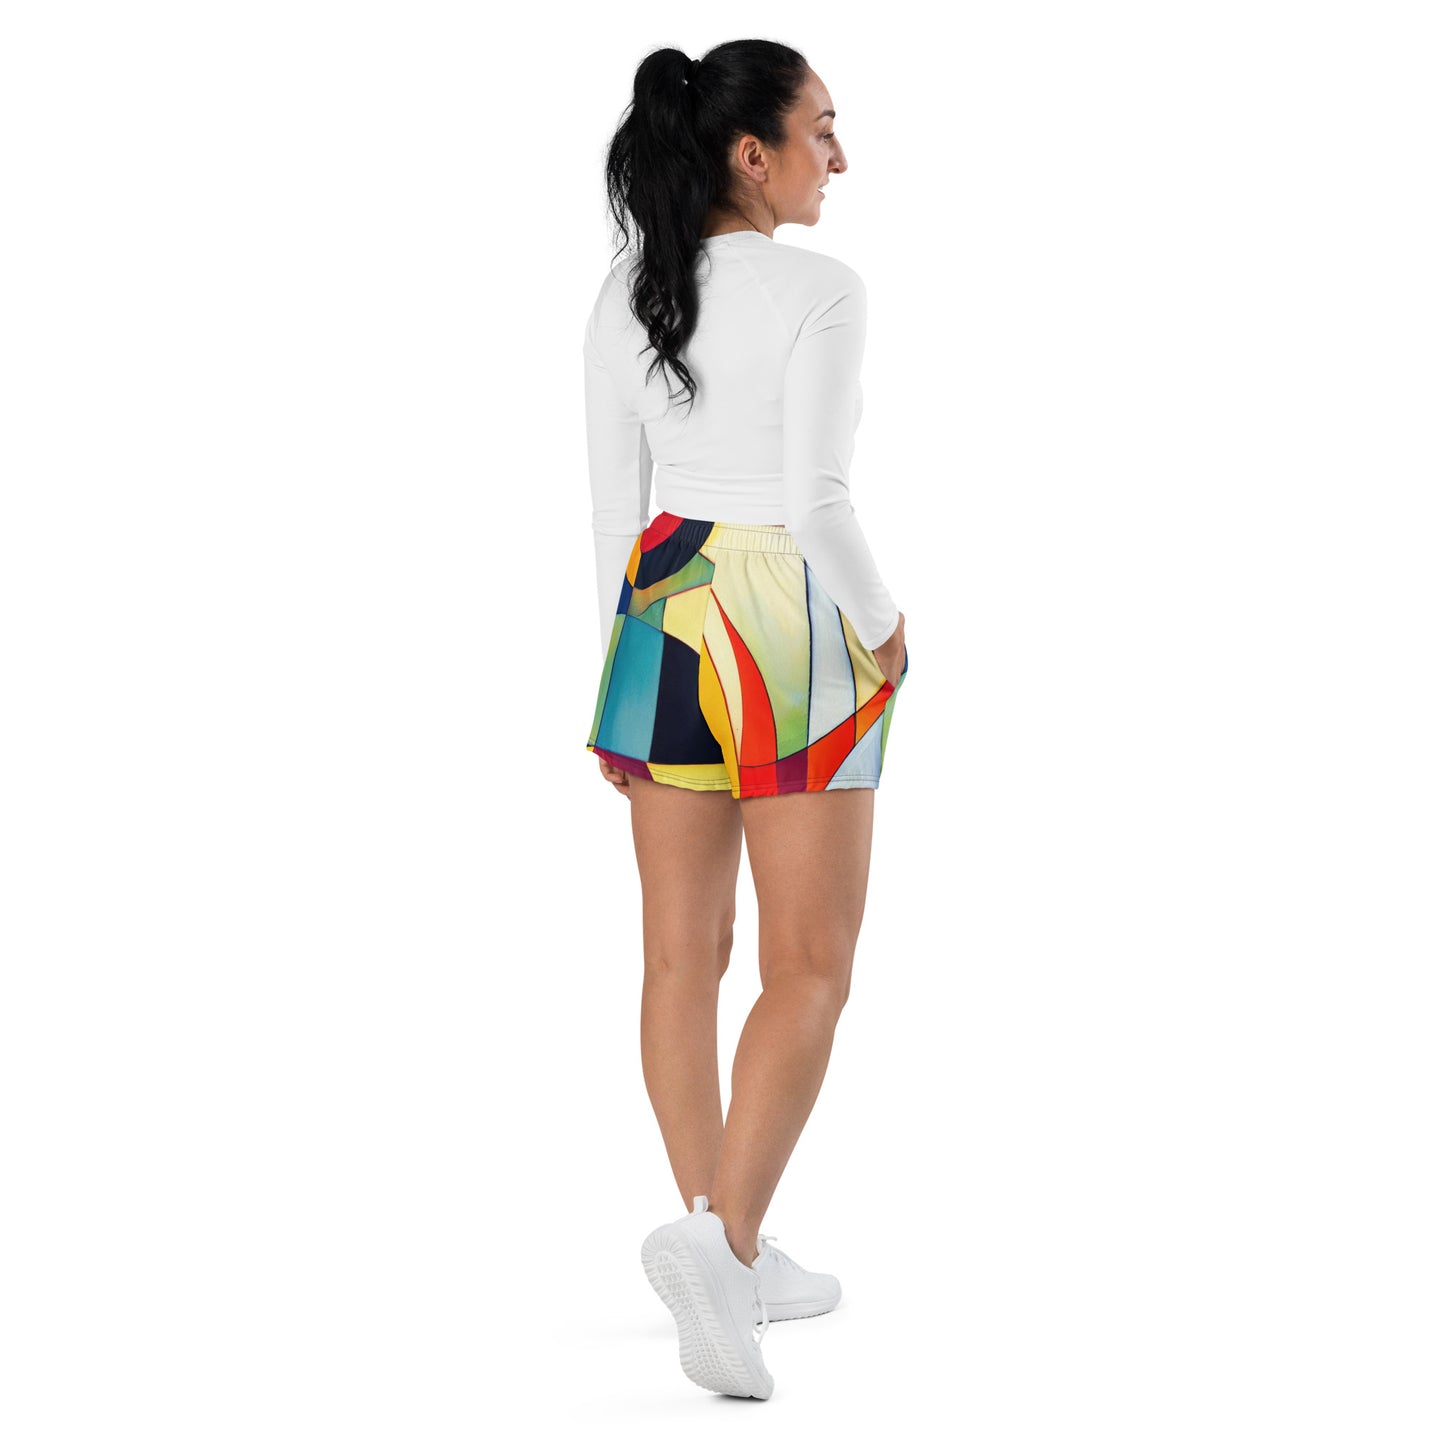 DMV 0024 Abstract Art Women’s Recycled Athletic Shorts